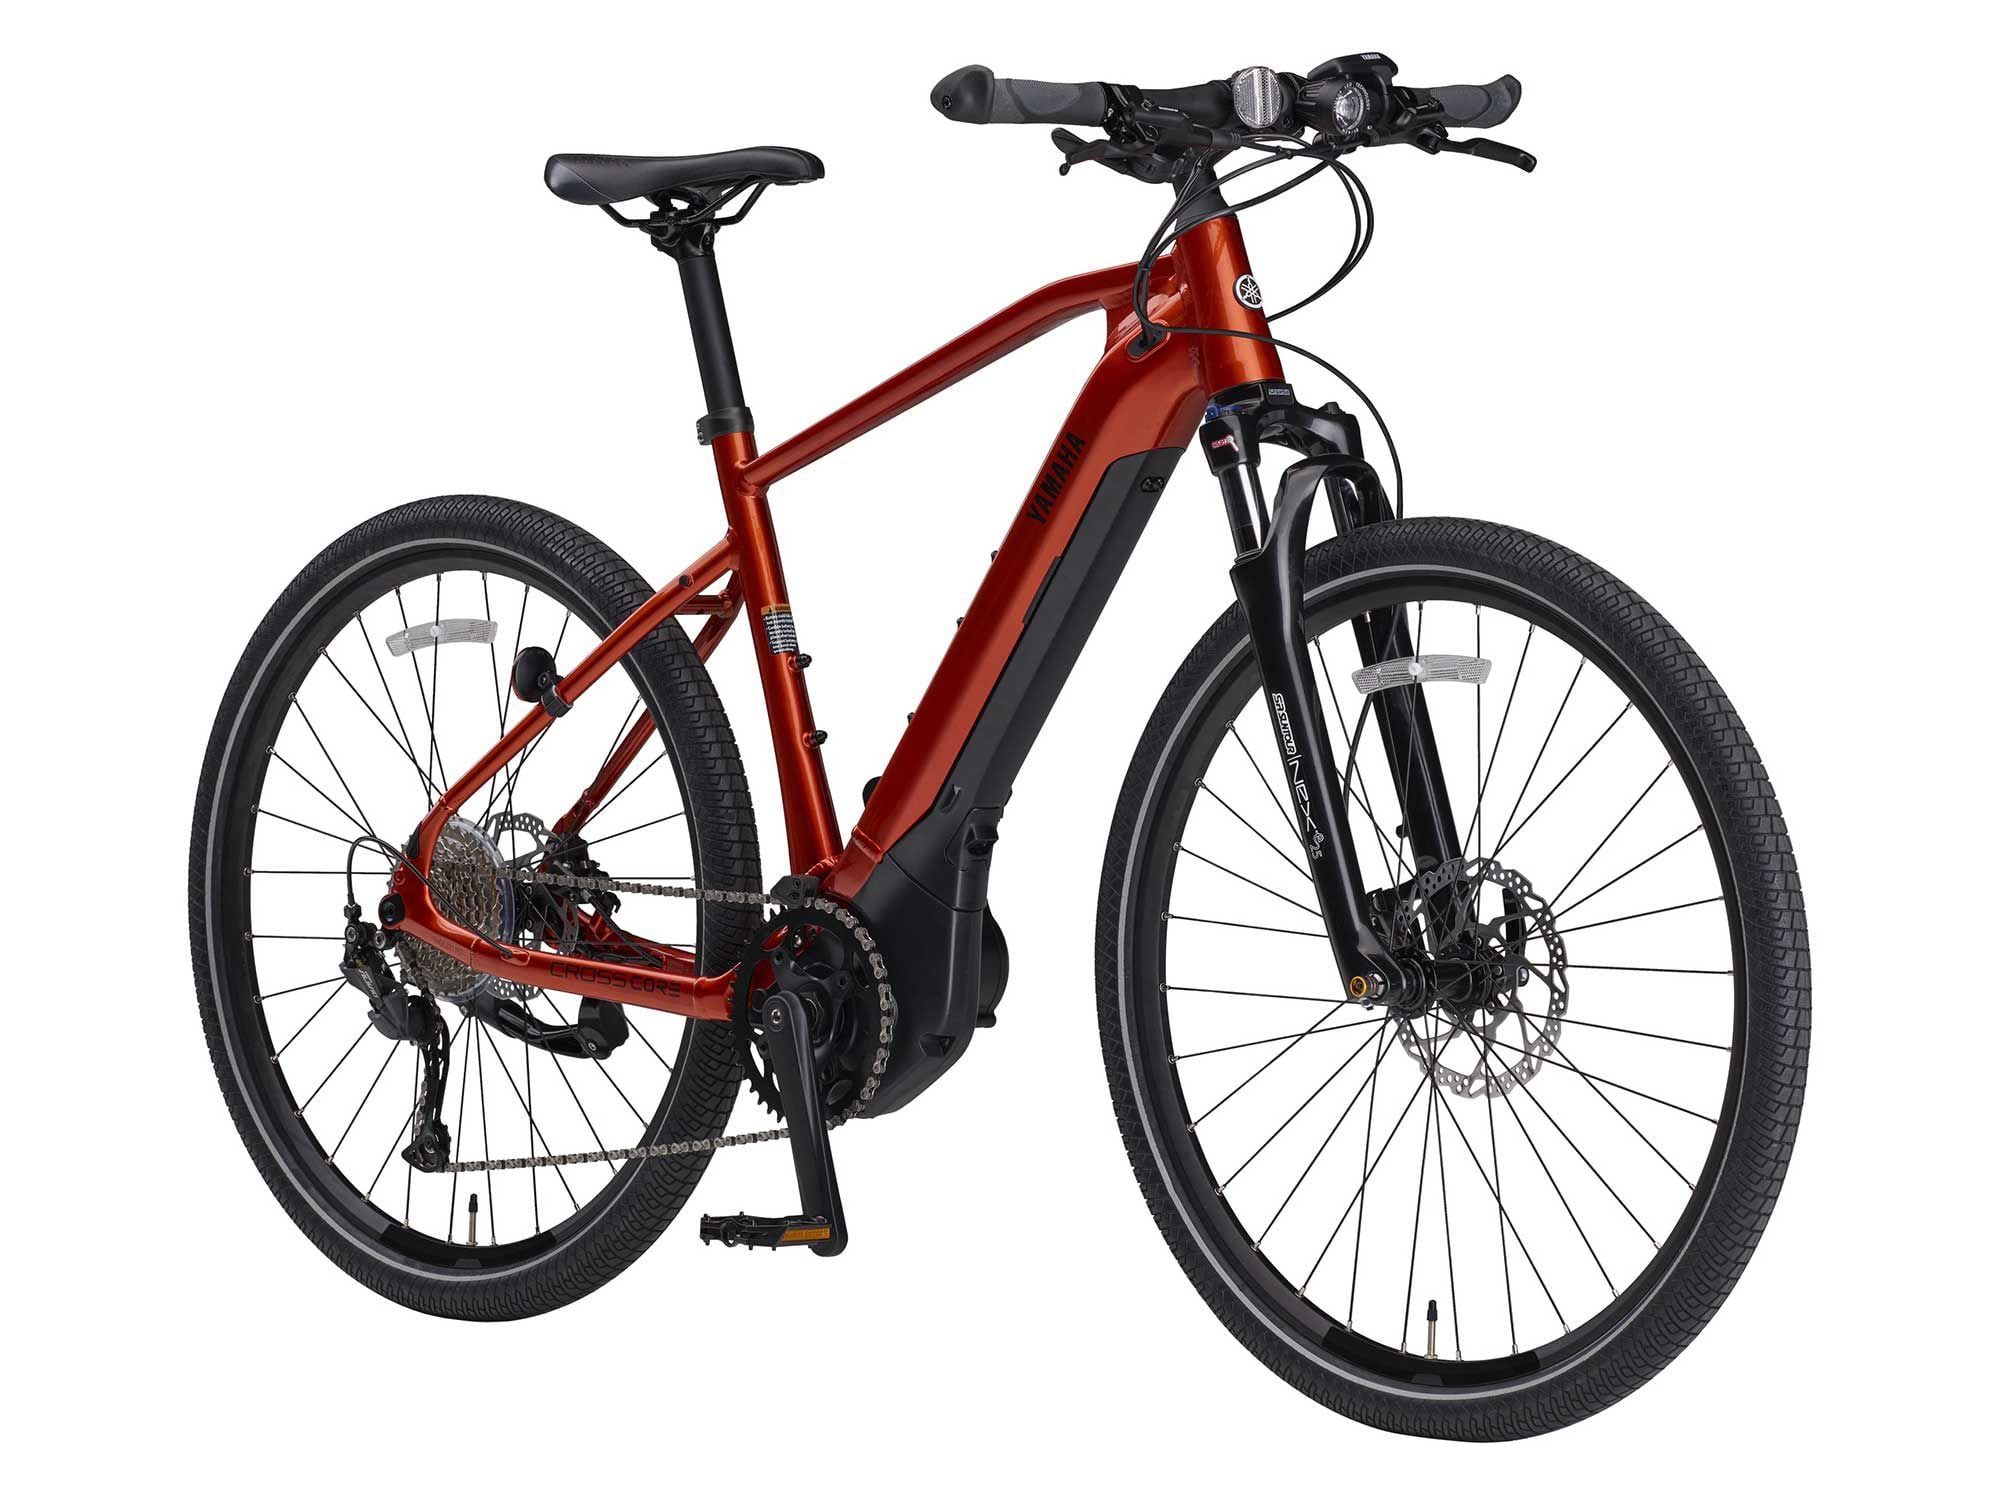 CrossCore RC Painted Desert: The 2022 Yamaha CrossCore RC electric bicycle is a do-it-all urban commuter.